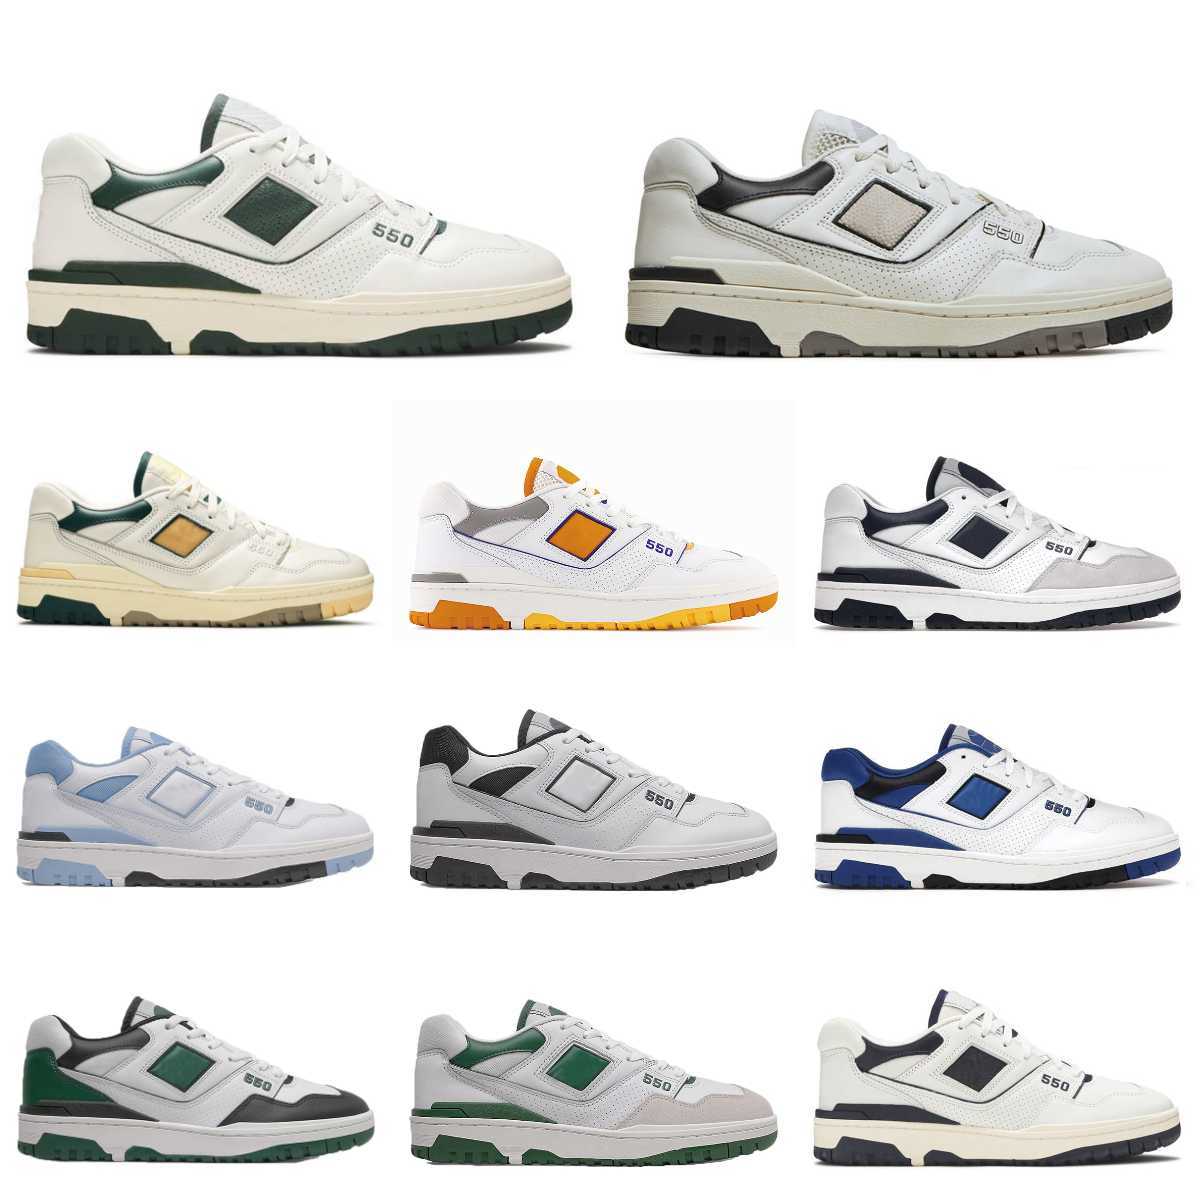 

New BB550 B550 550 Outdoor Shoes Men Women White Syracuse Burgundy Cyan AURALEE Green Grey Cream Black Blue UNC Navy Purple Shadow Mens Trainers Designers Sports S18, Please contact us